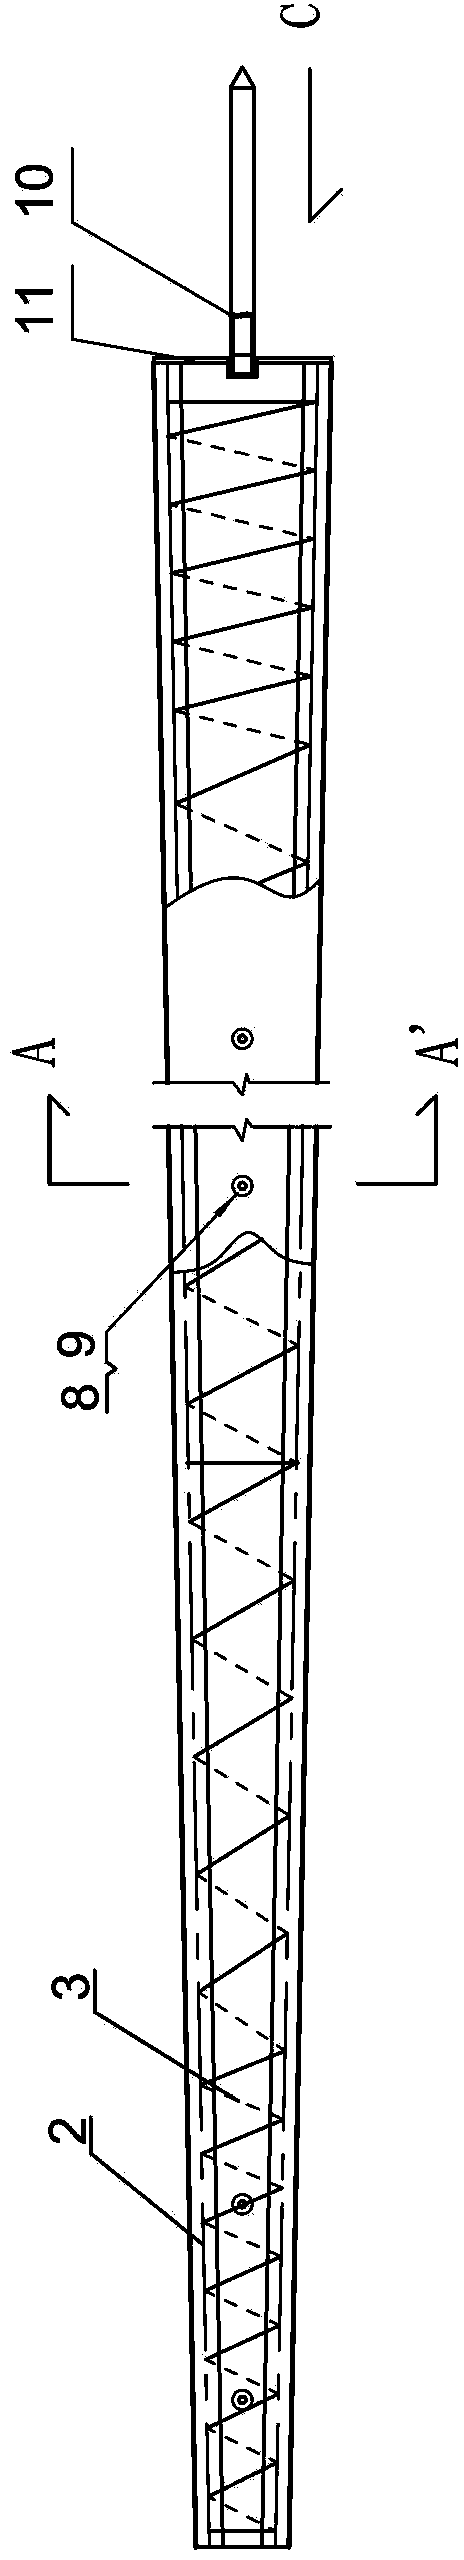 Concrete pole with grounding integration function